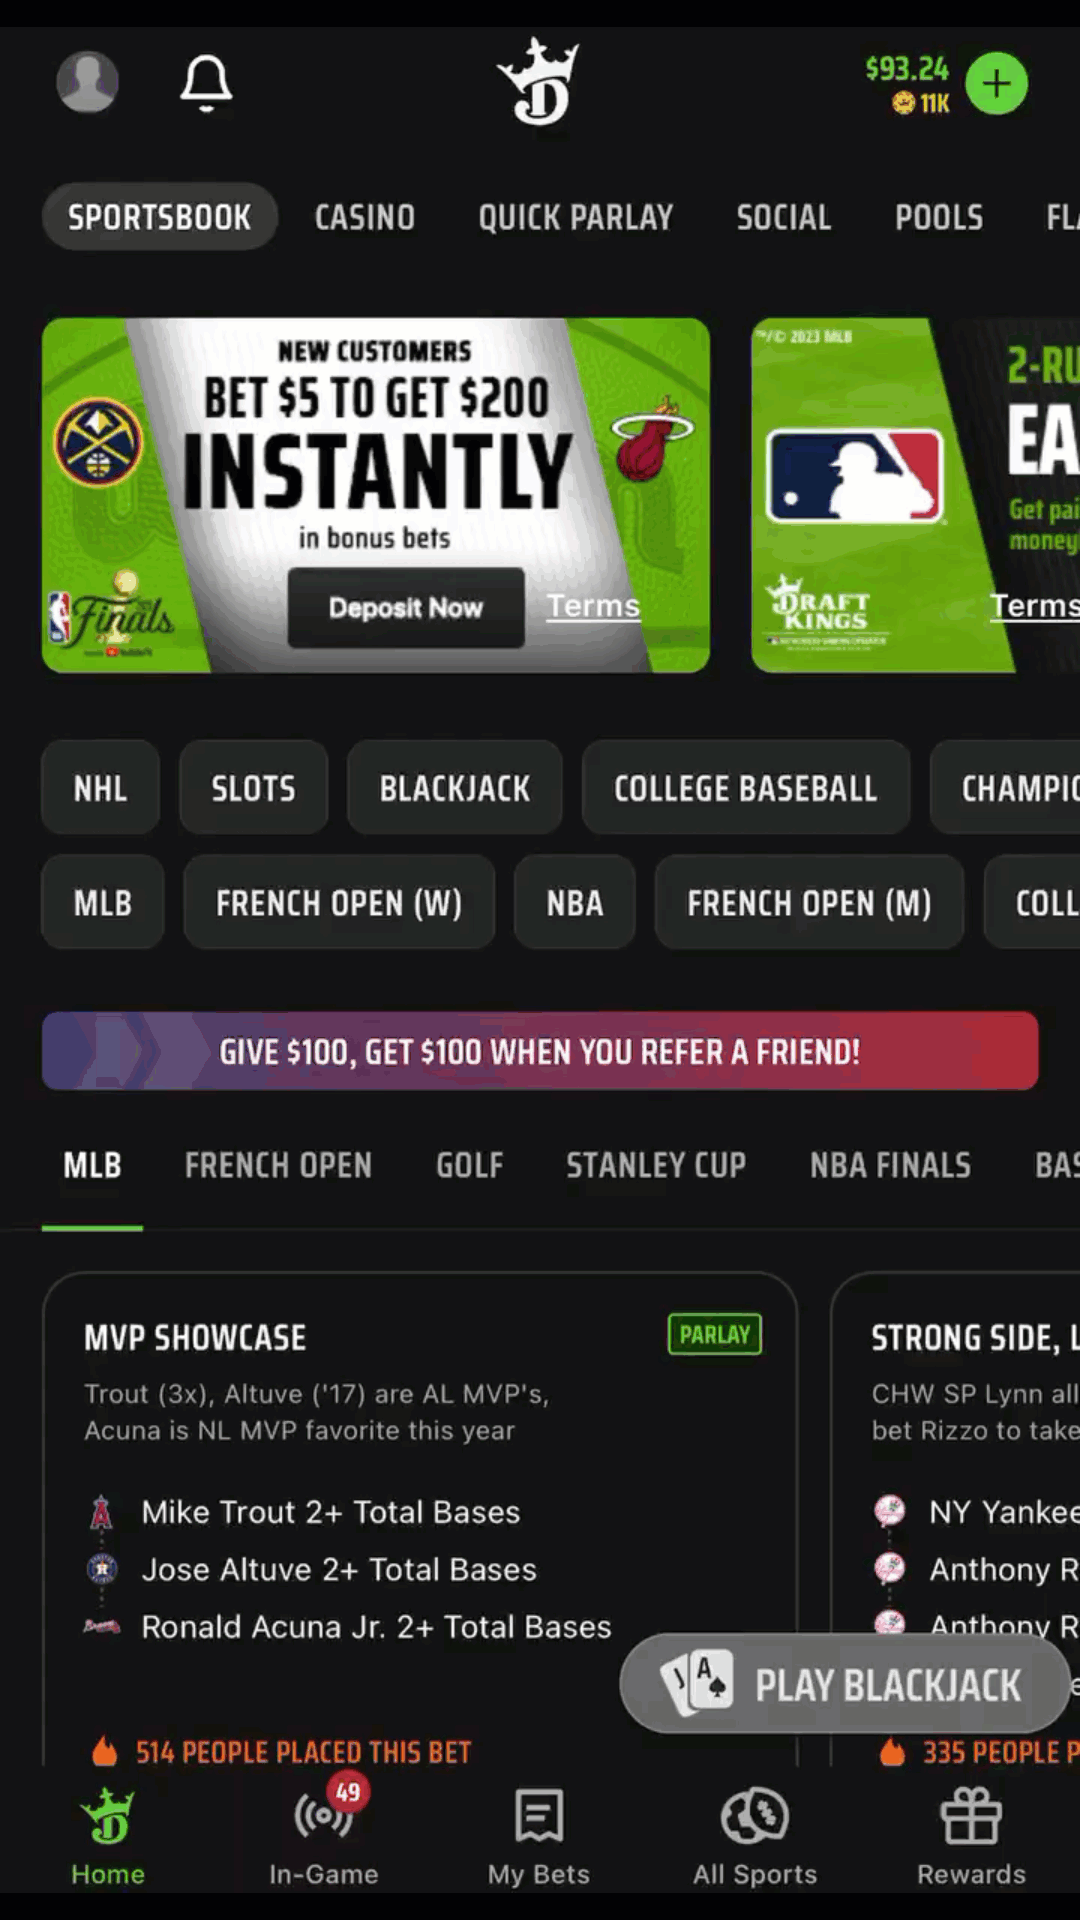 Step by step on how to convert DraftKings crowns to DK Dollars via the app